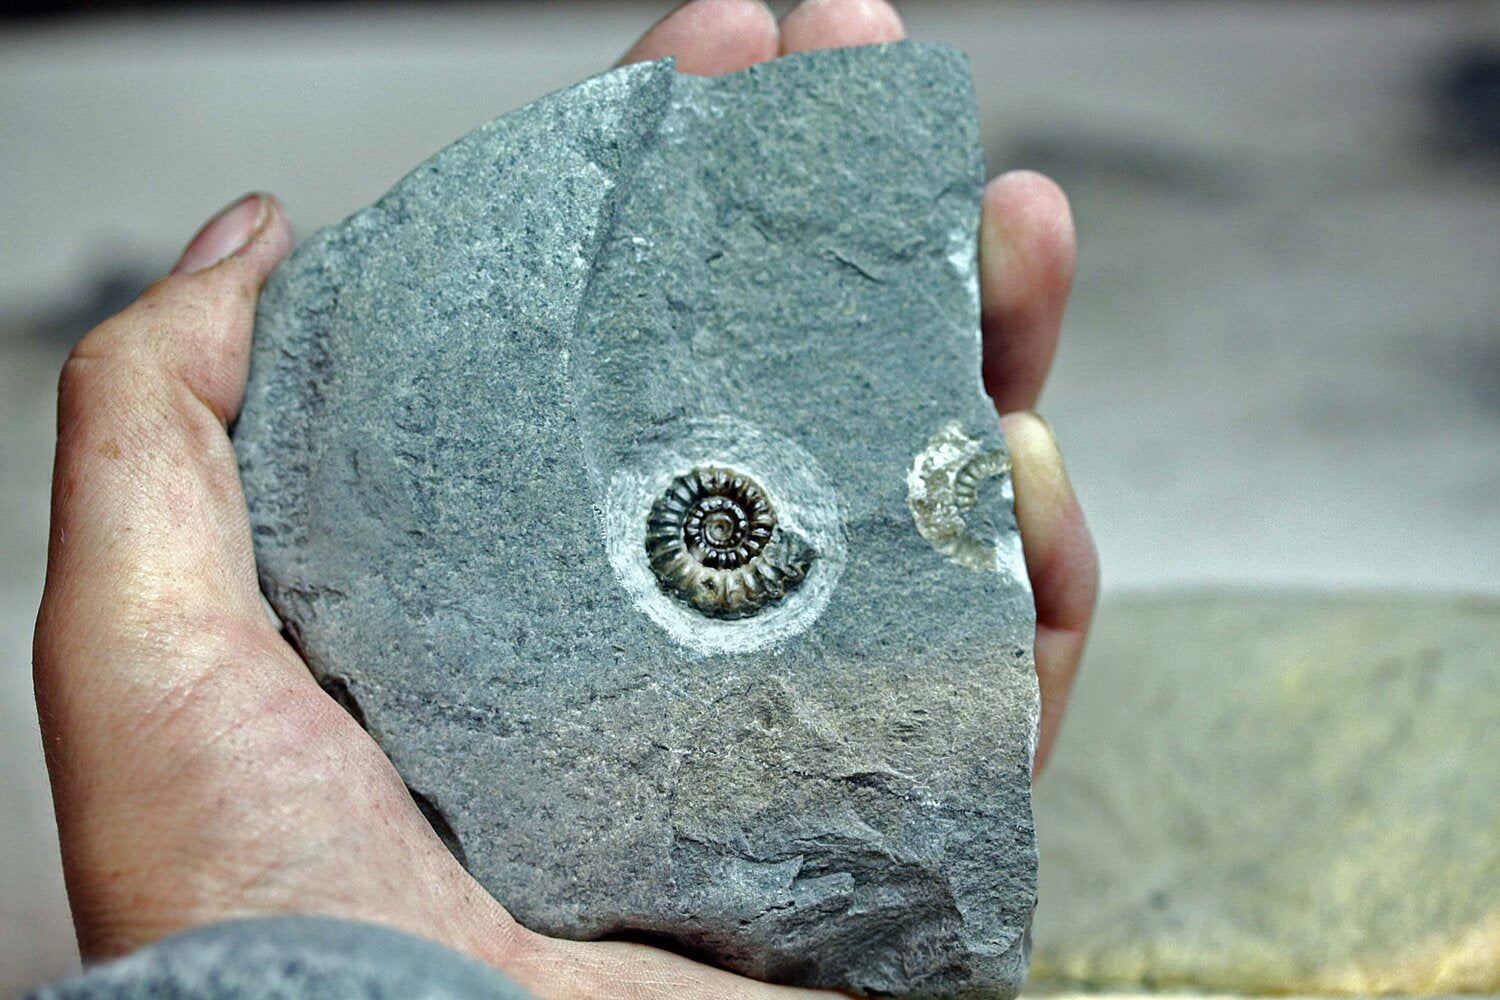 ammonite fossil finished fossil preparation prep promicroceras lyme regis using only an air scribe no air abrasive